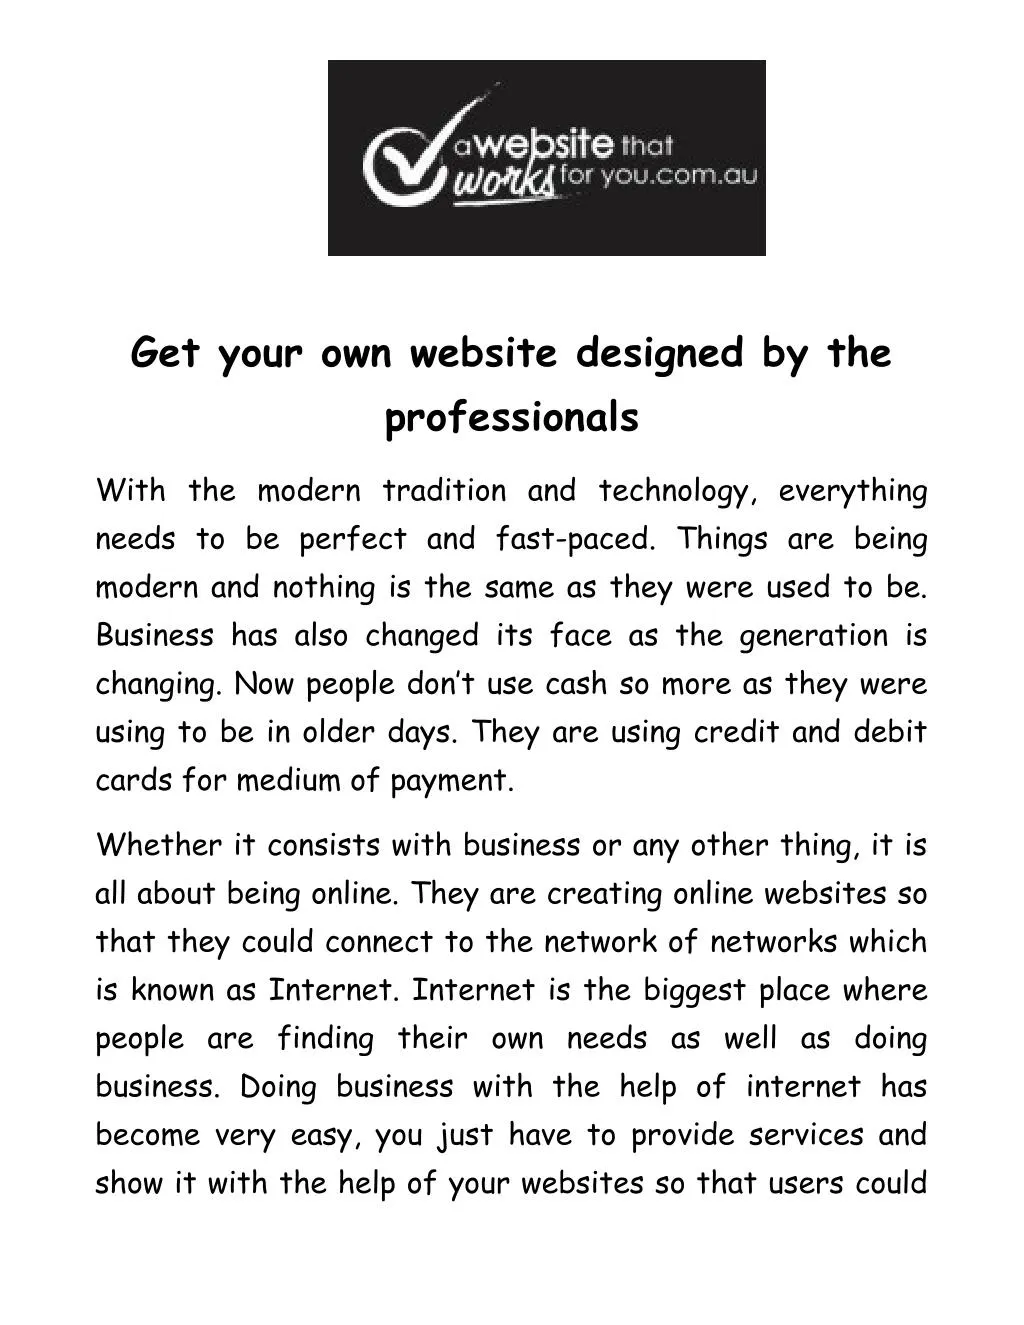 get your own website designed by the professionals